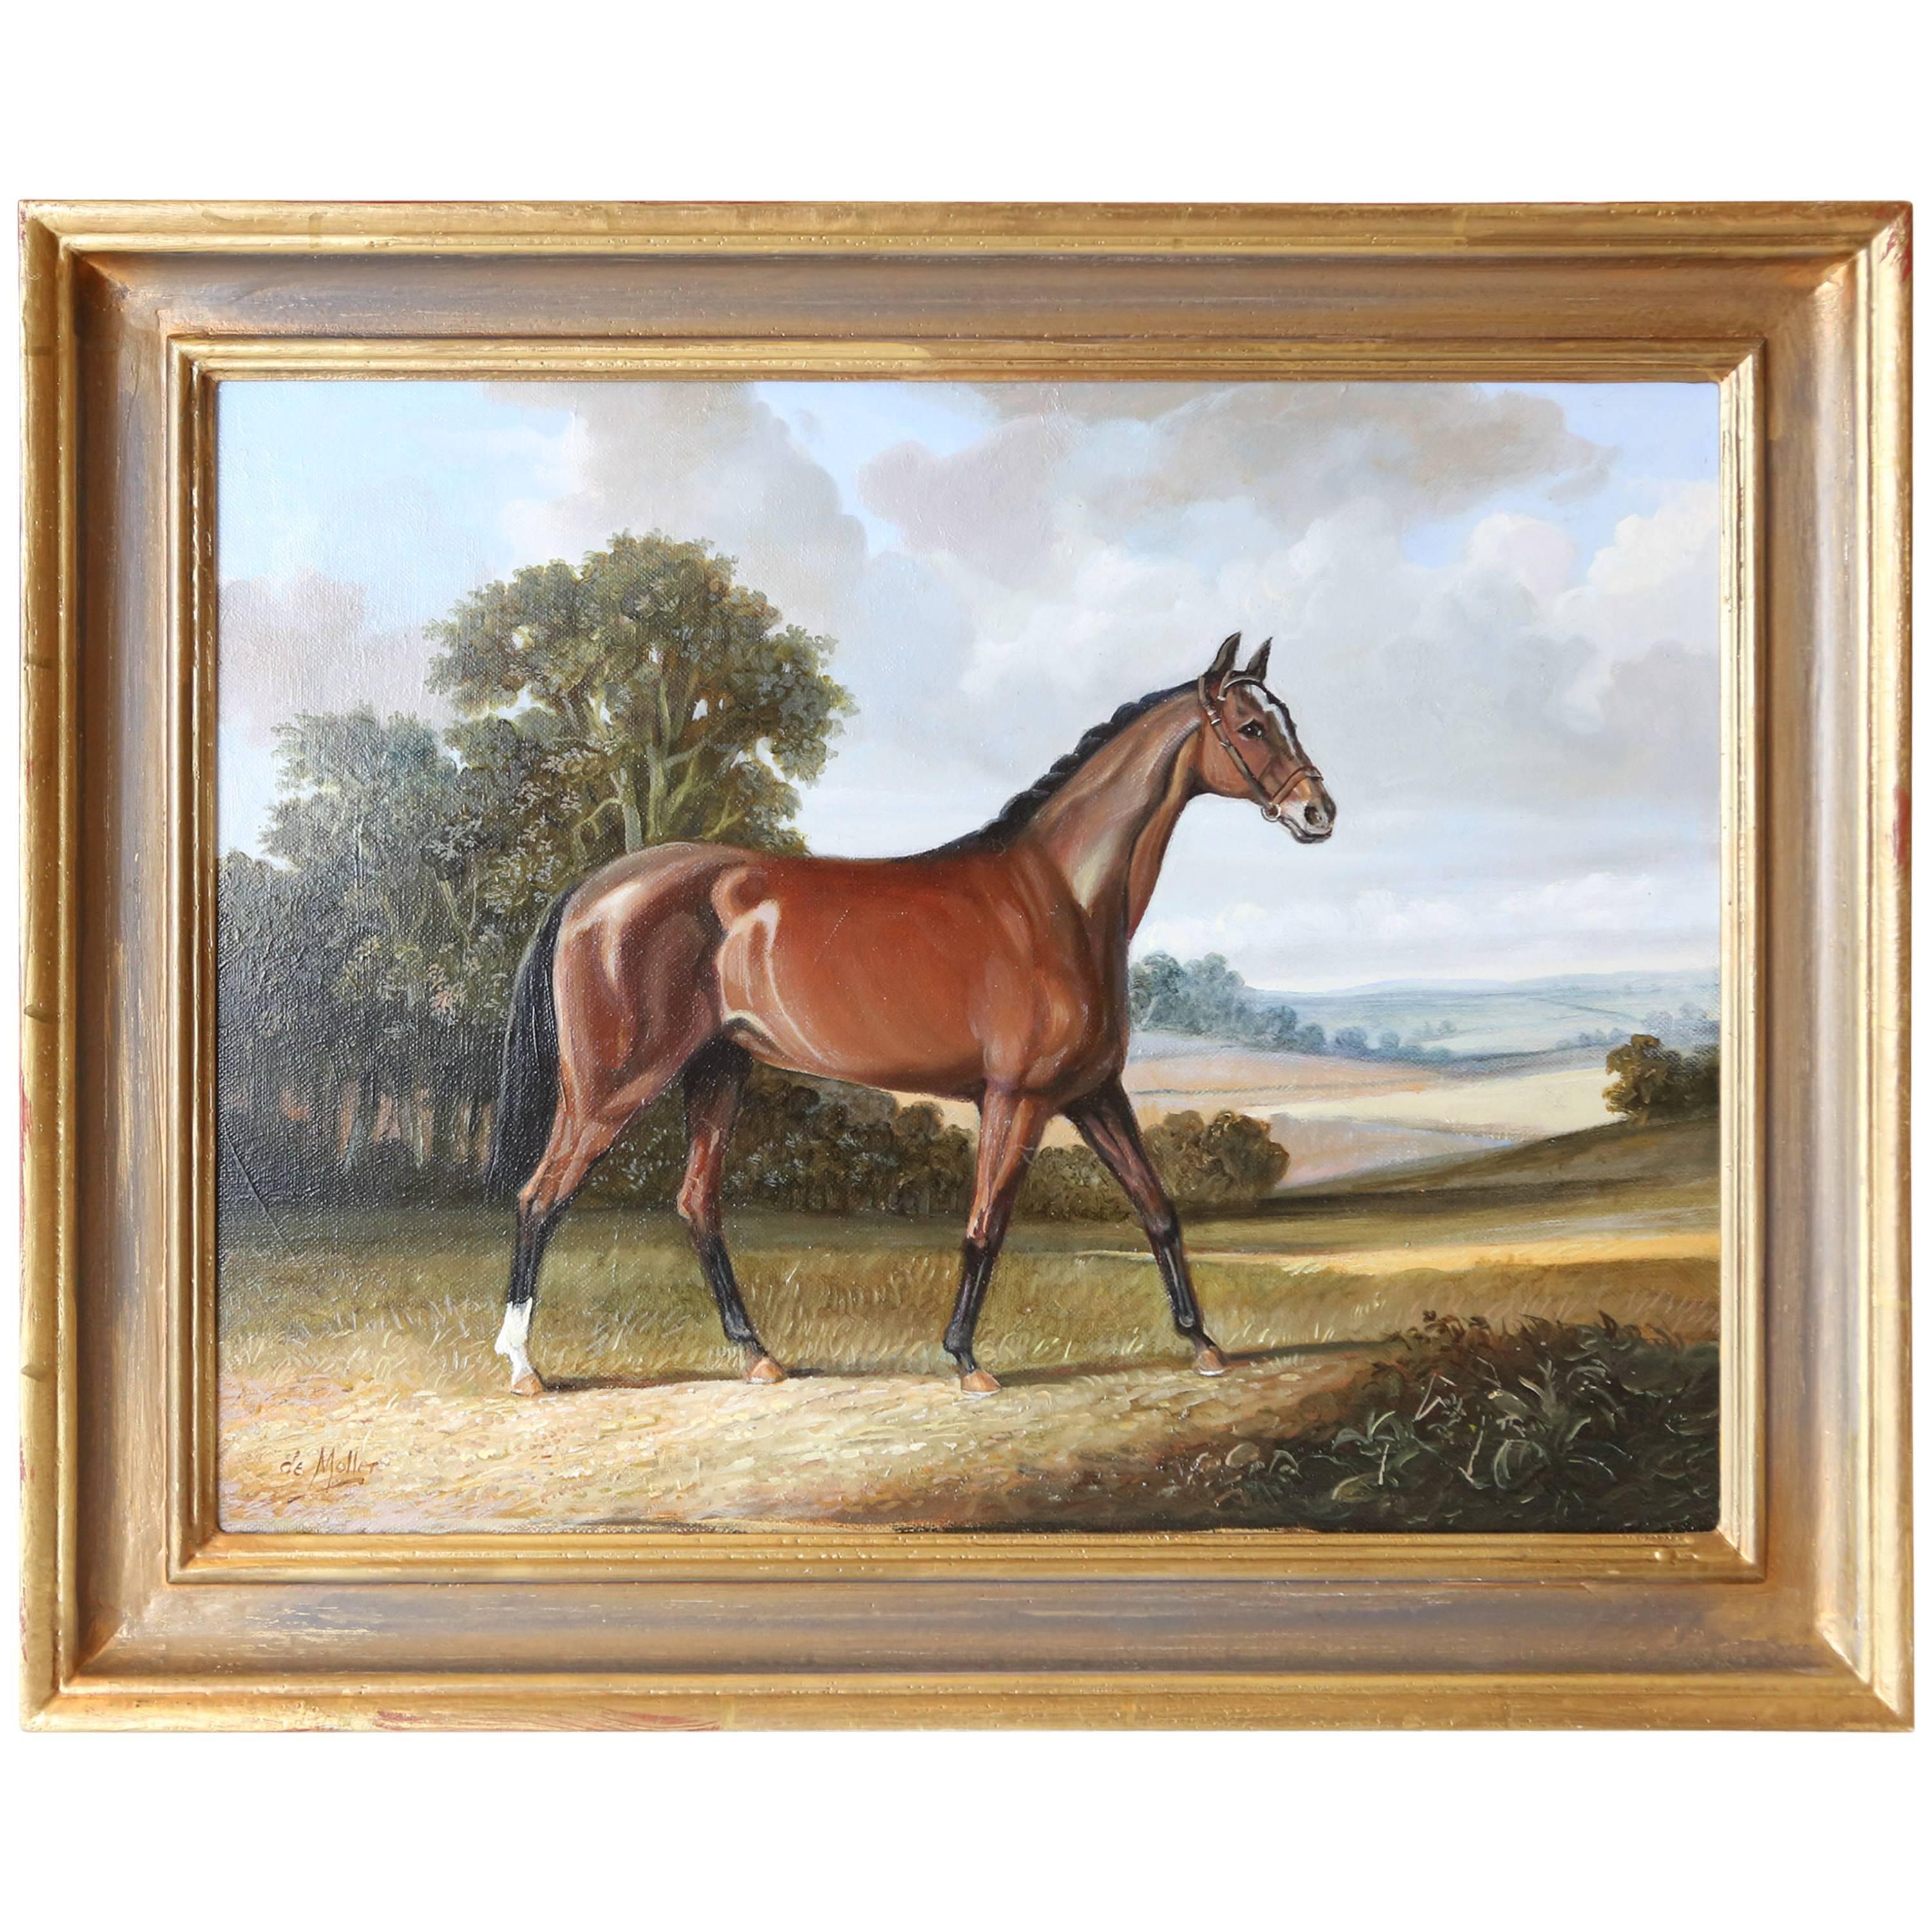 Painting of Horse by André de Moller